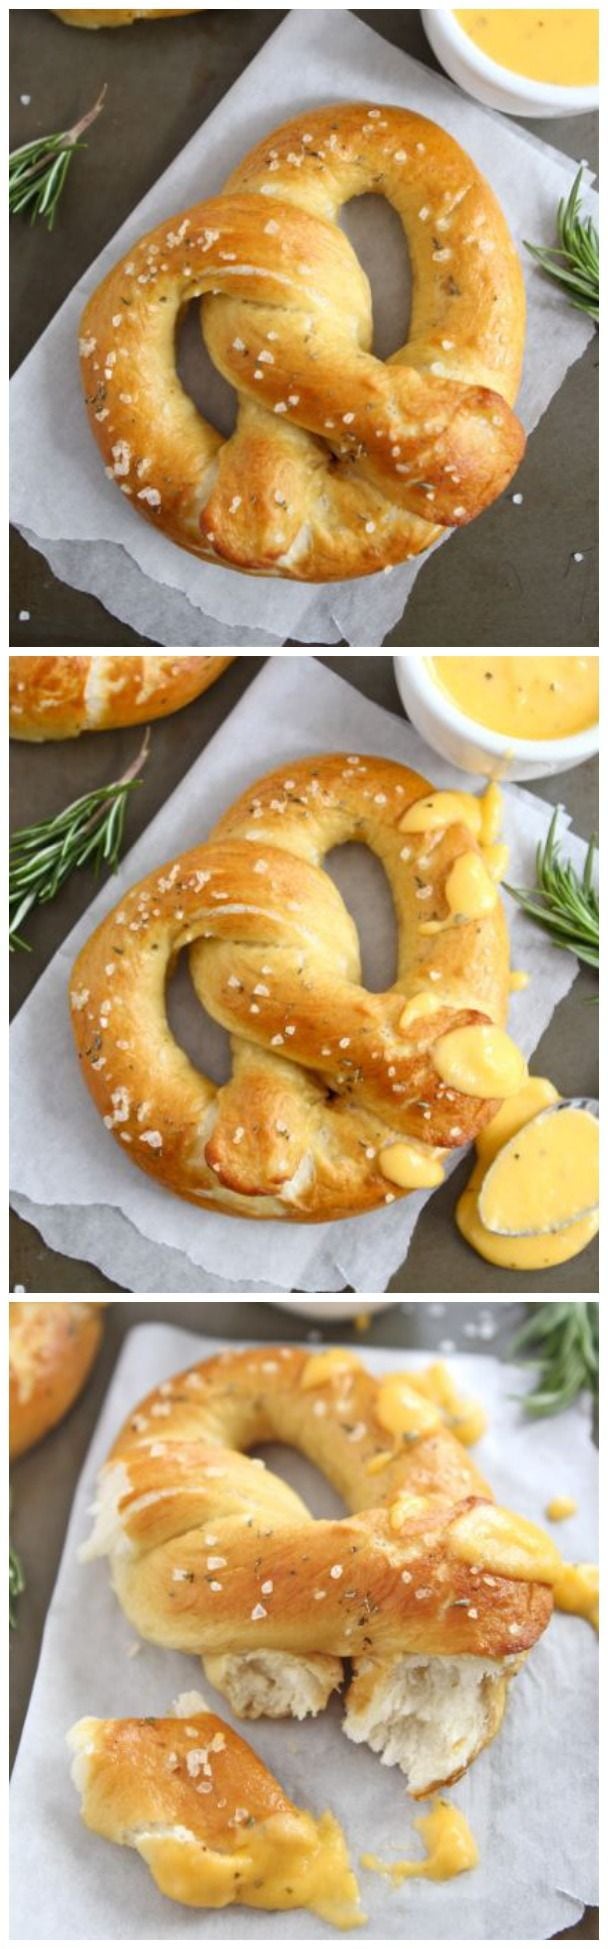 Rosemary Sea Salt Pretzels with Cheese Sauce on twopeasandtheirpod.com These homemade pretzels are easy to make at home and SO good!